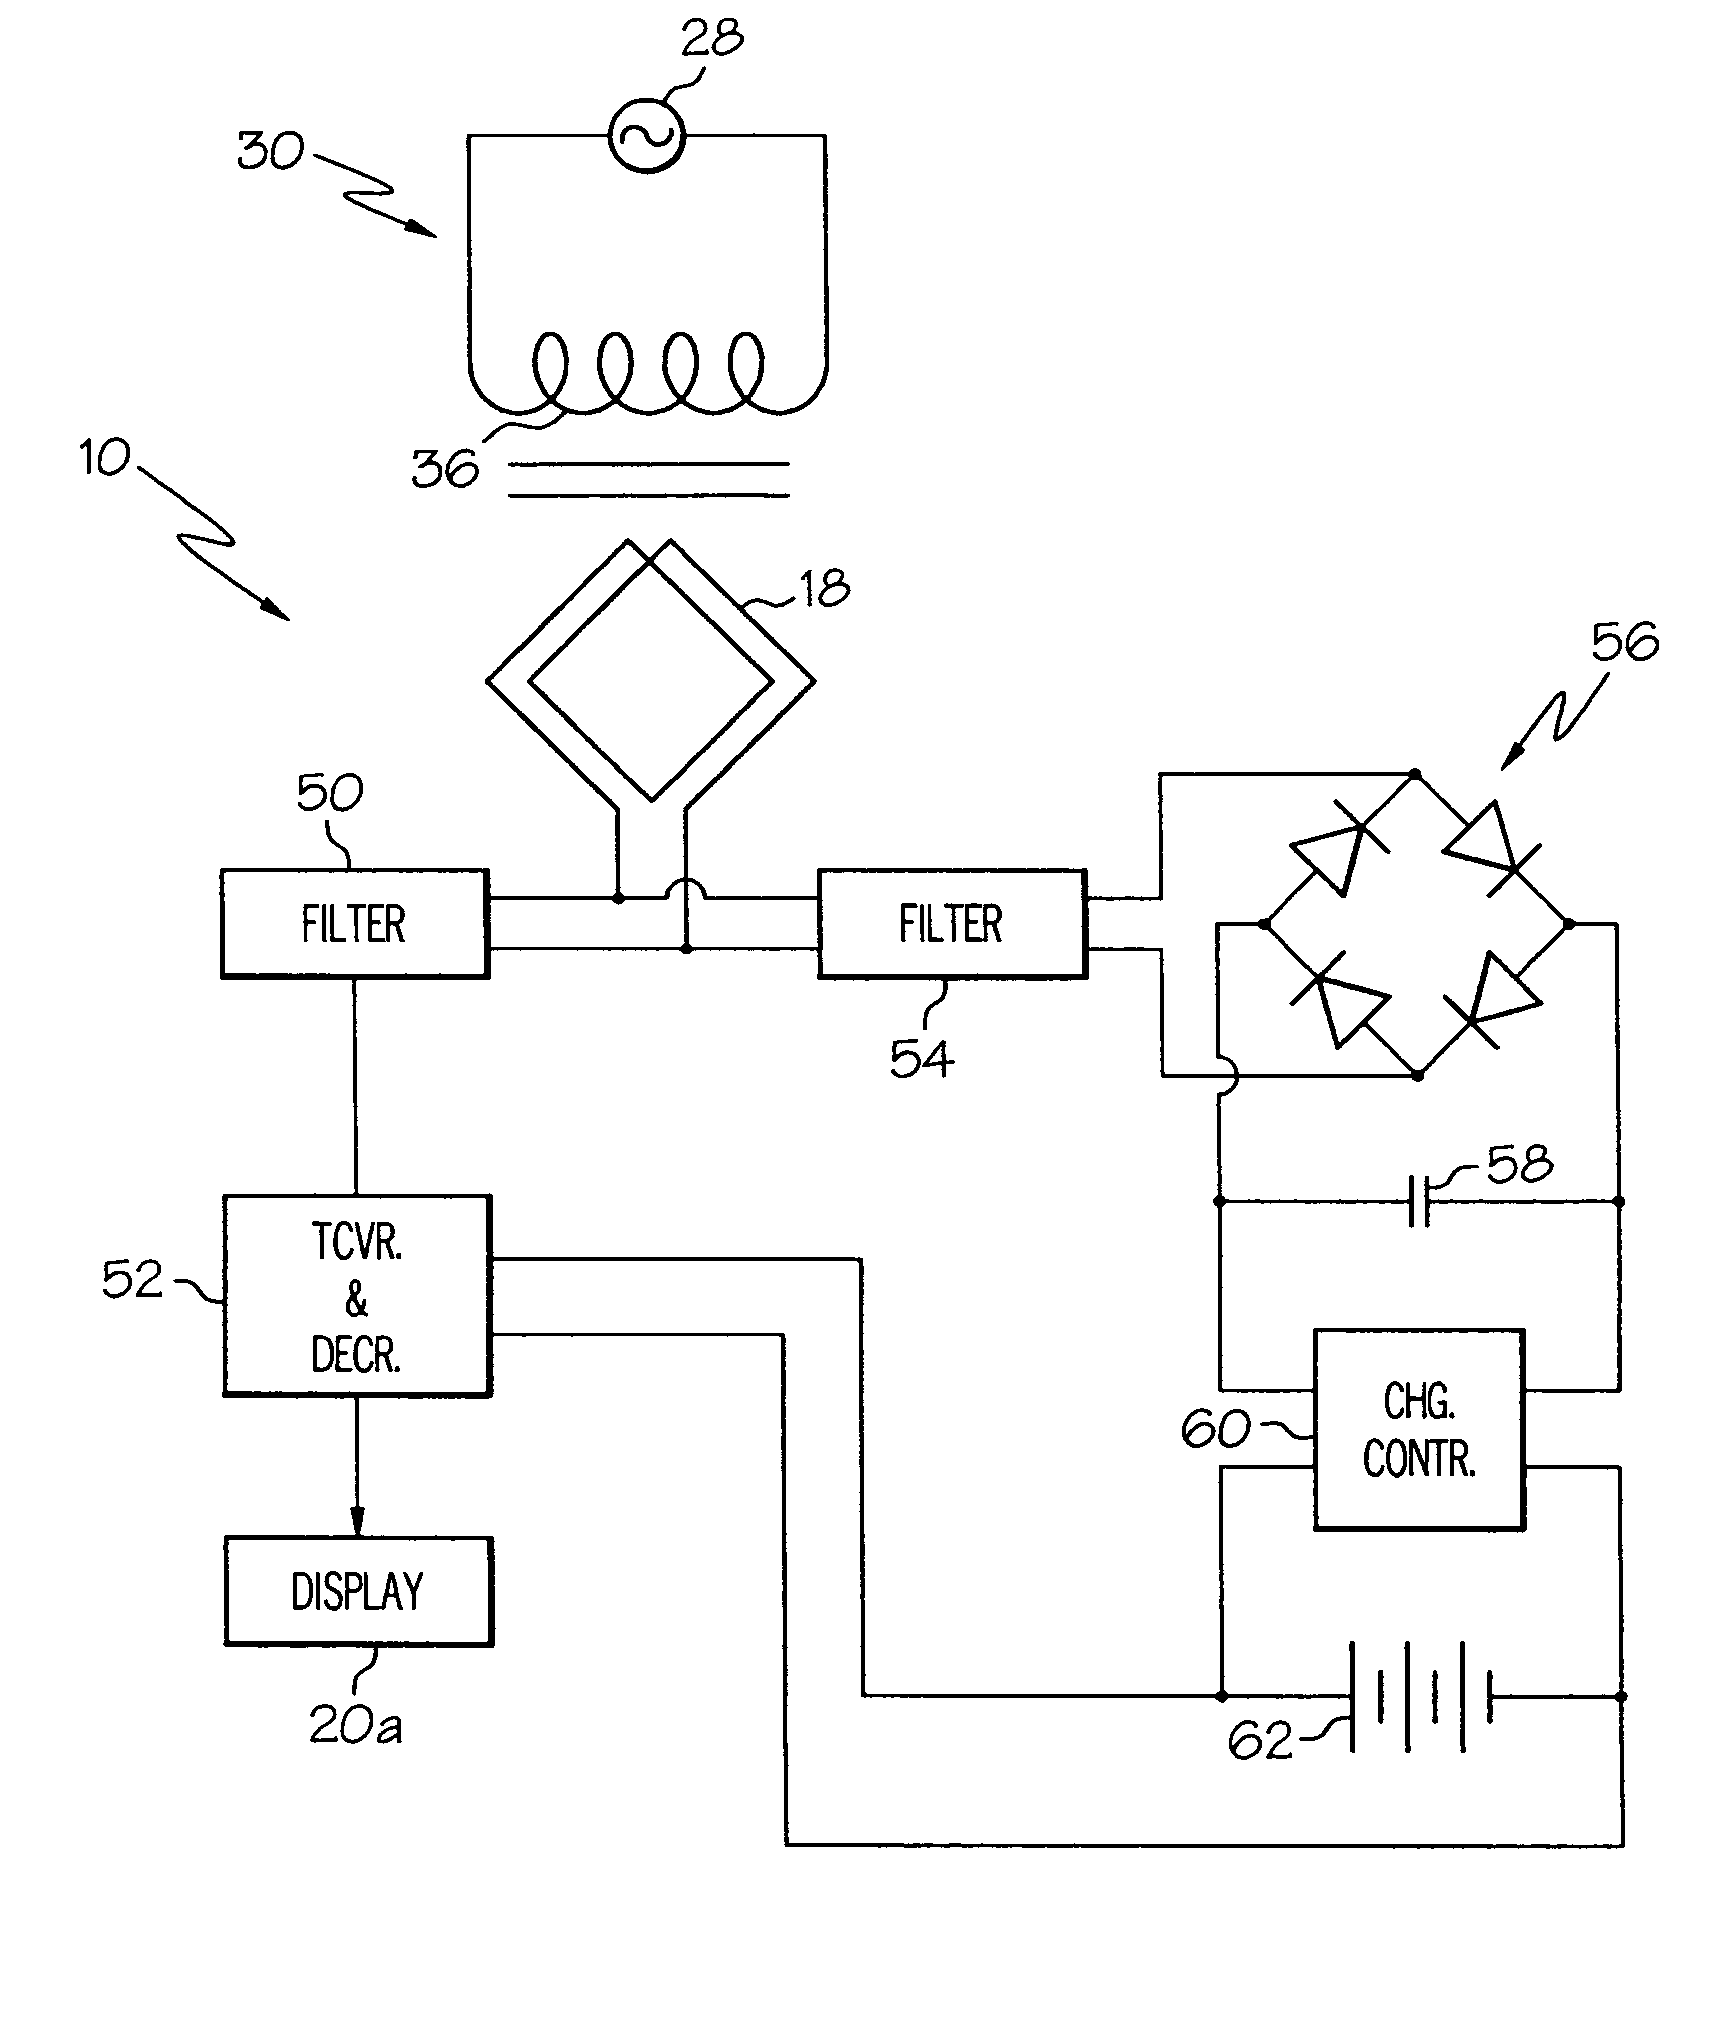 Wristband reader apparatus for human-implanted radio frequency identification device